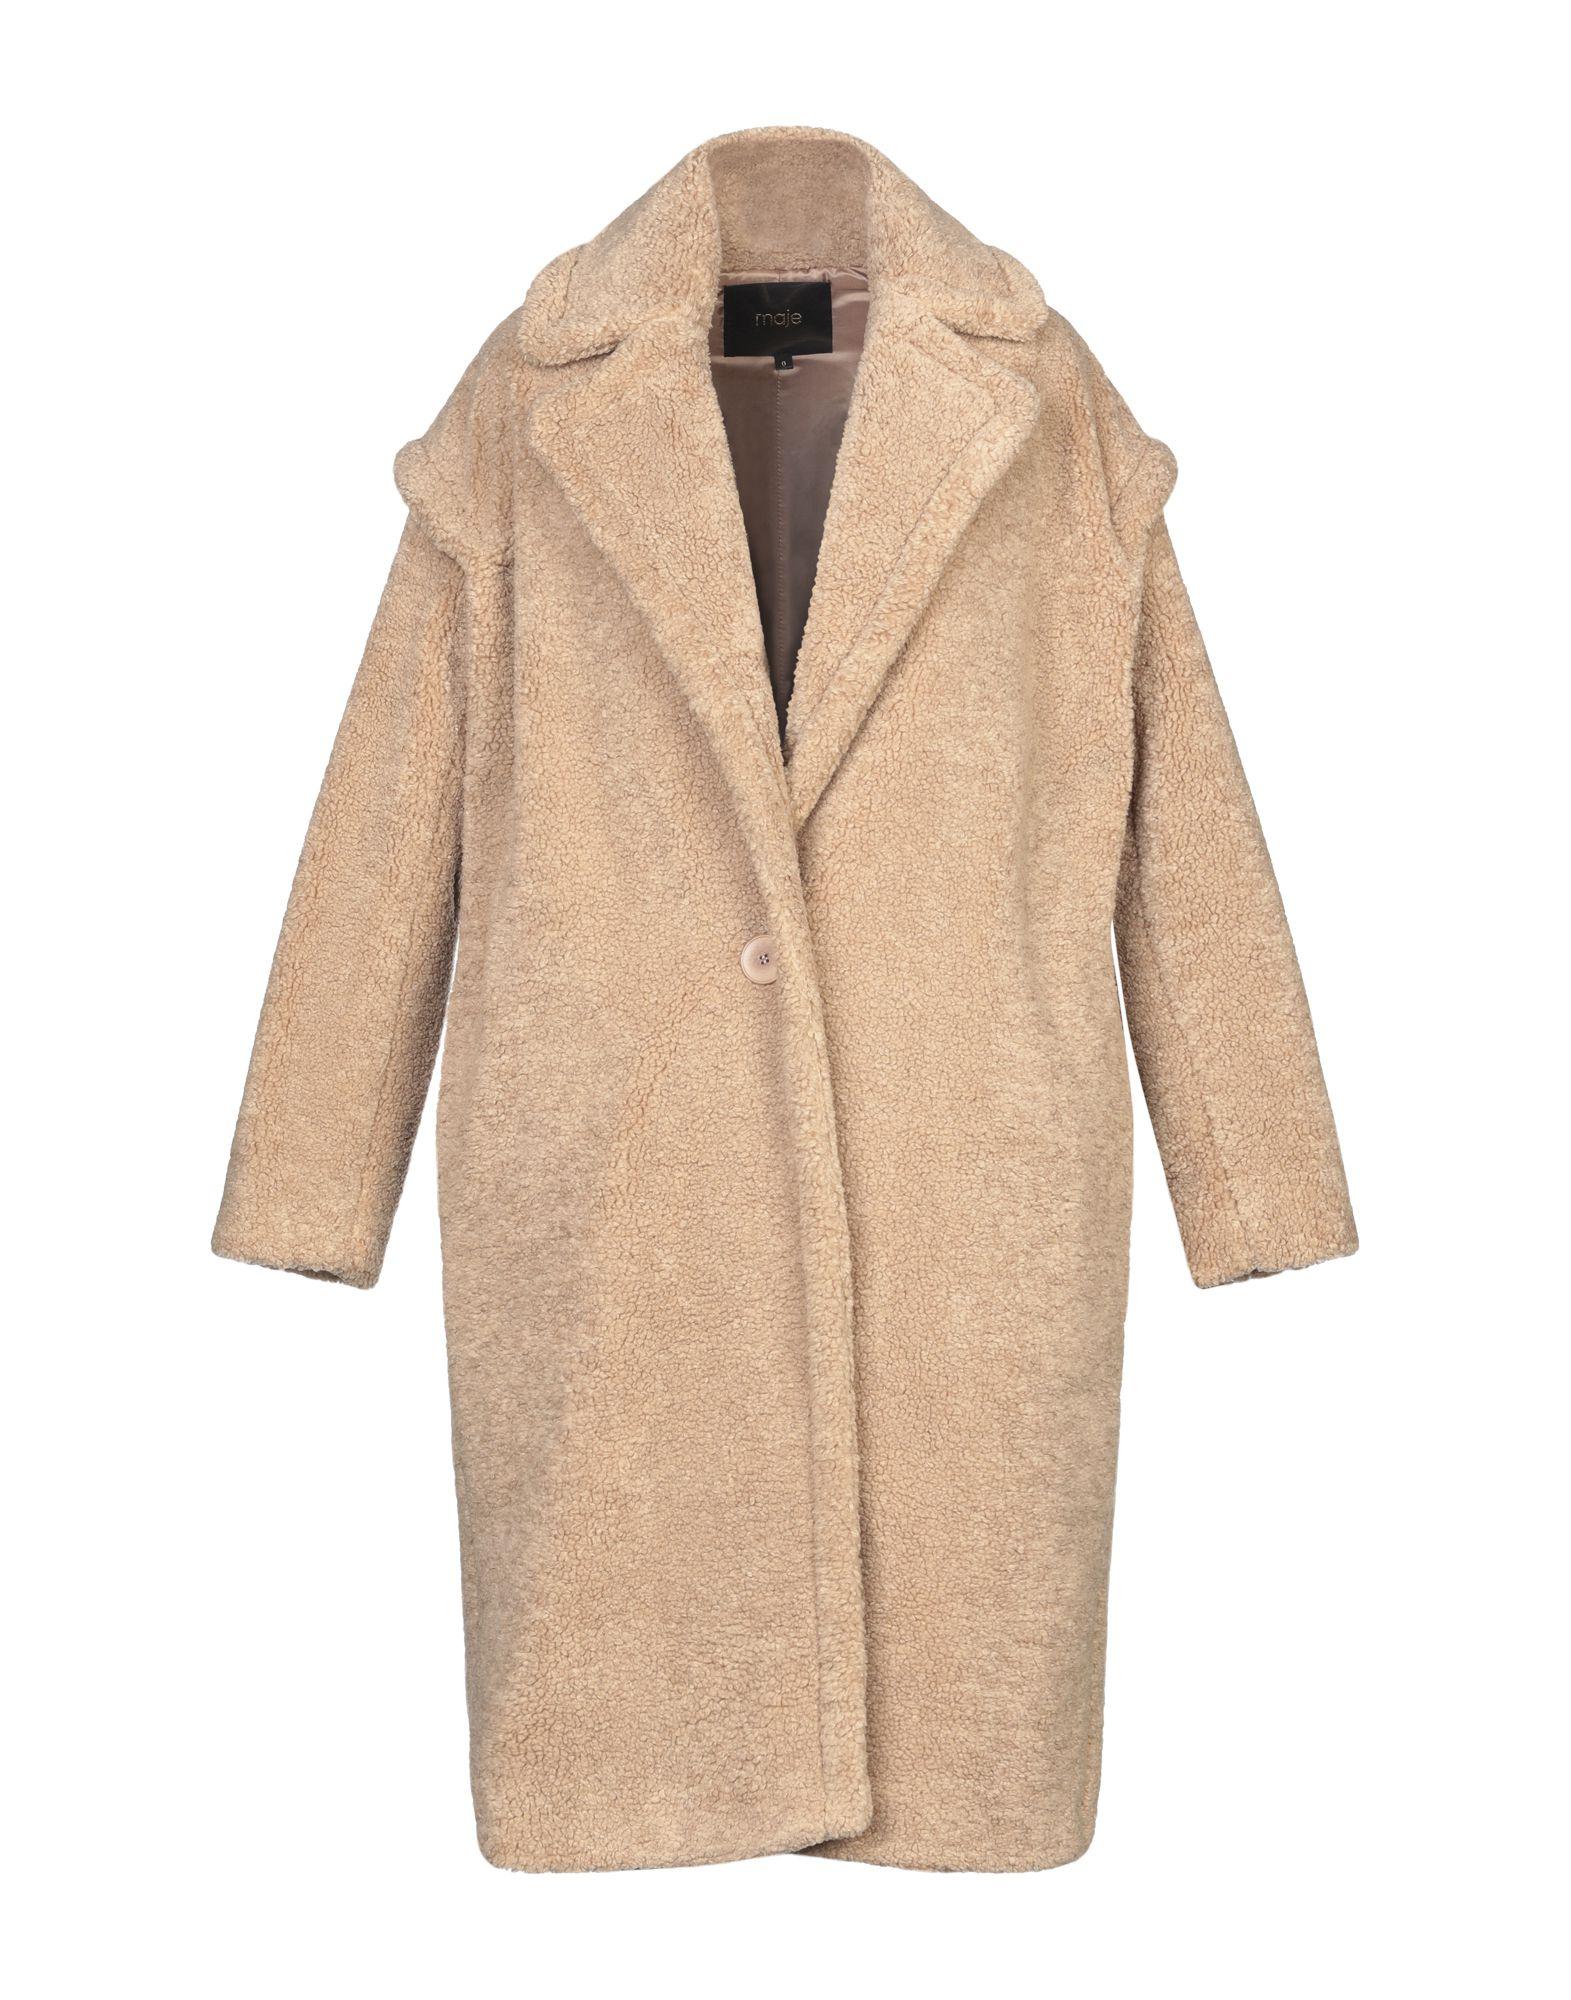 Maje Synthetic Coat in Camel (Natural) - Lyst